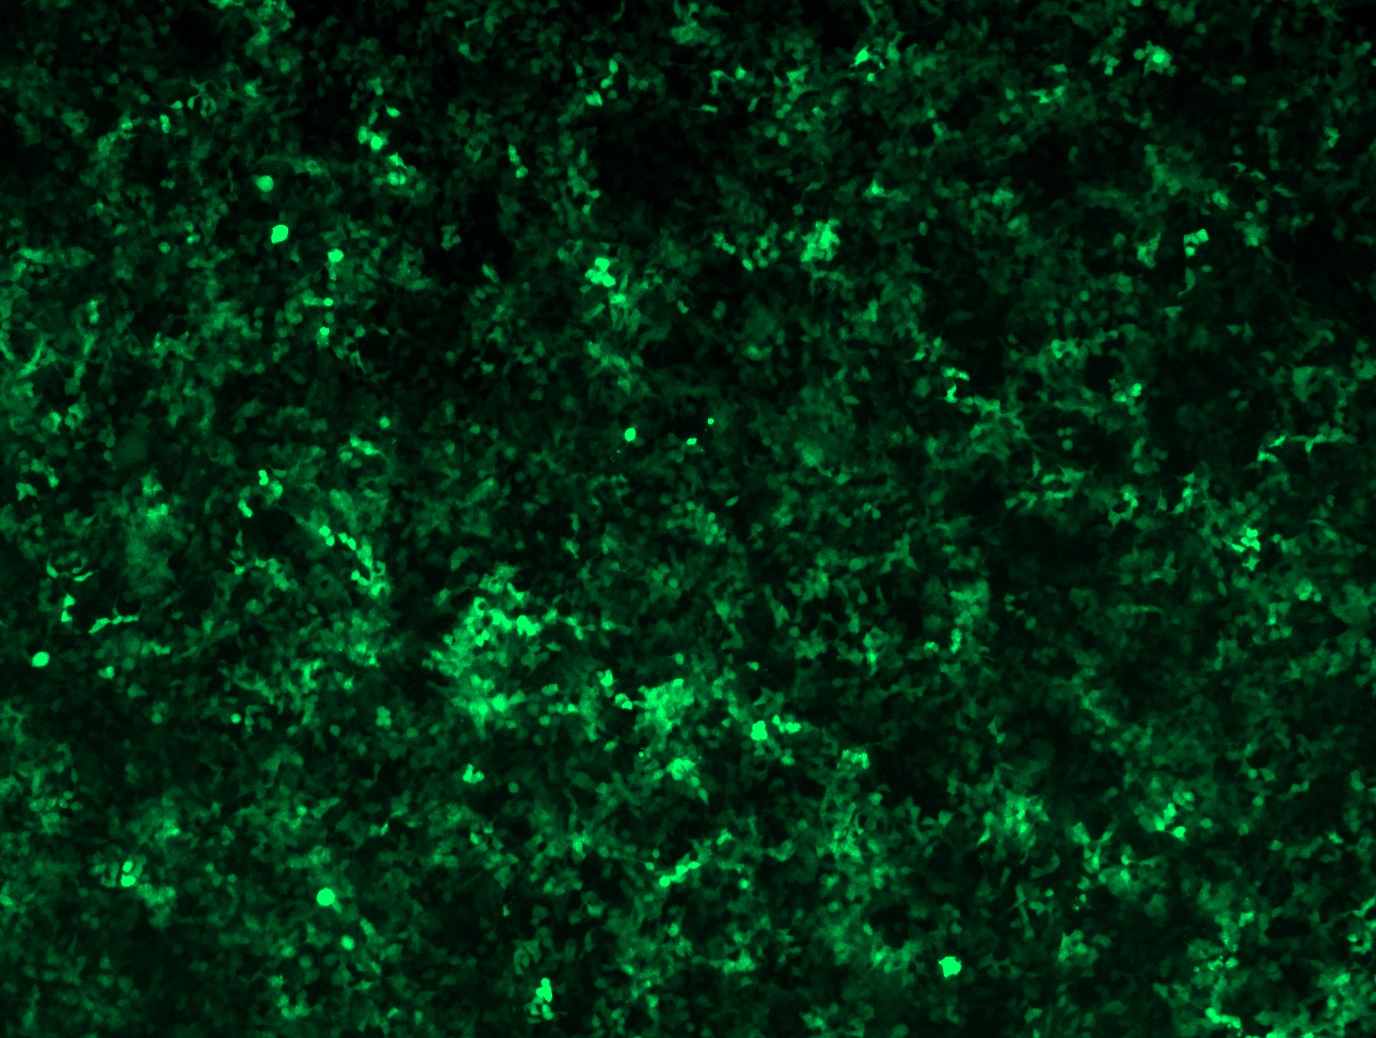 GFP signal was observed under microscope at 48 hours after transduction of TL304247A virus into HEK293 cells. TL304247A virus was prepared using lenti-shRNA TL304247A and TR30037 packaging kit.